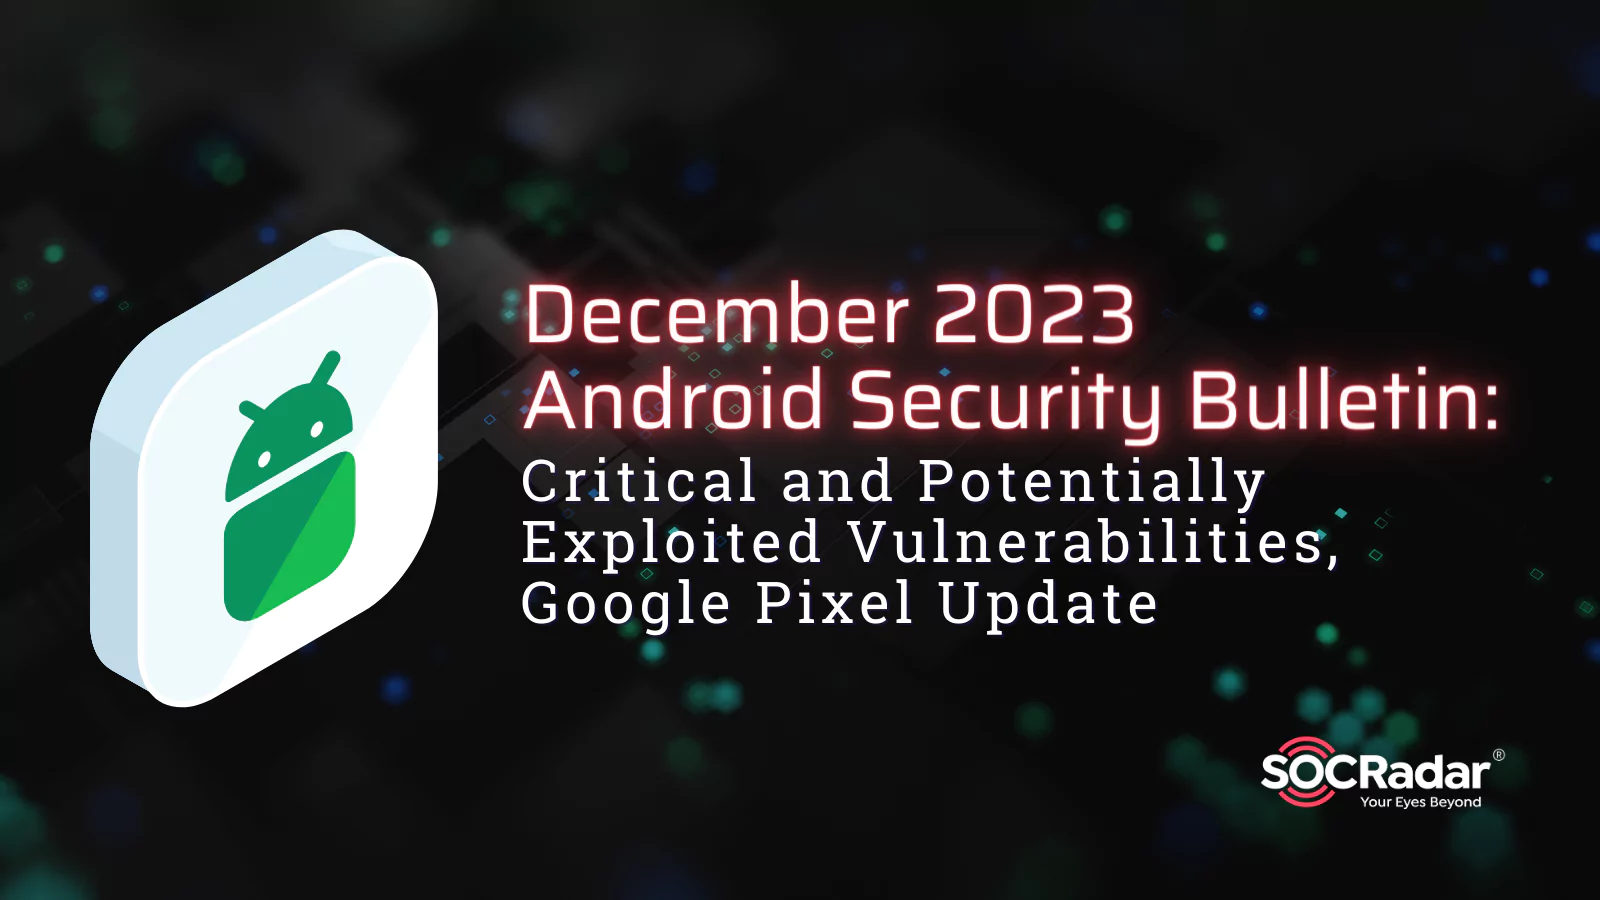 December 2023 Android Security Bulletin Critical and Potentially